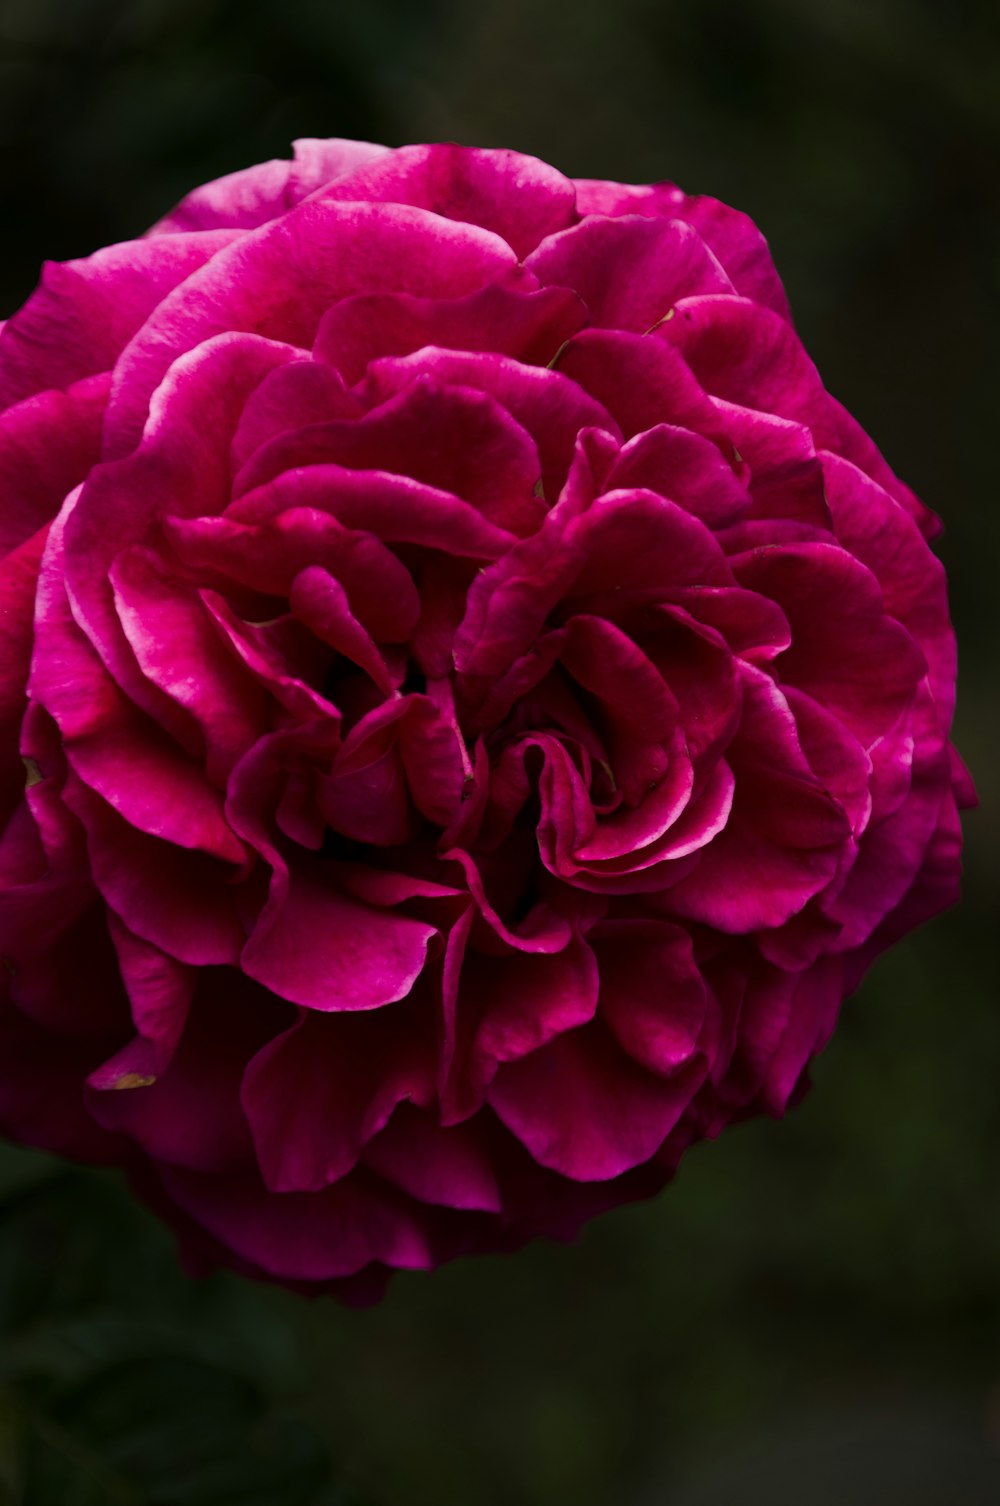 pink rose in bloom close up photo